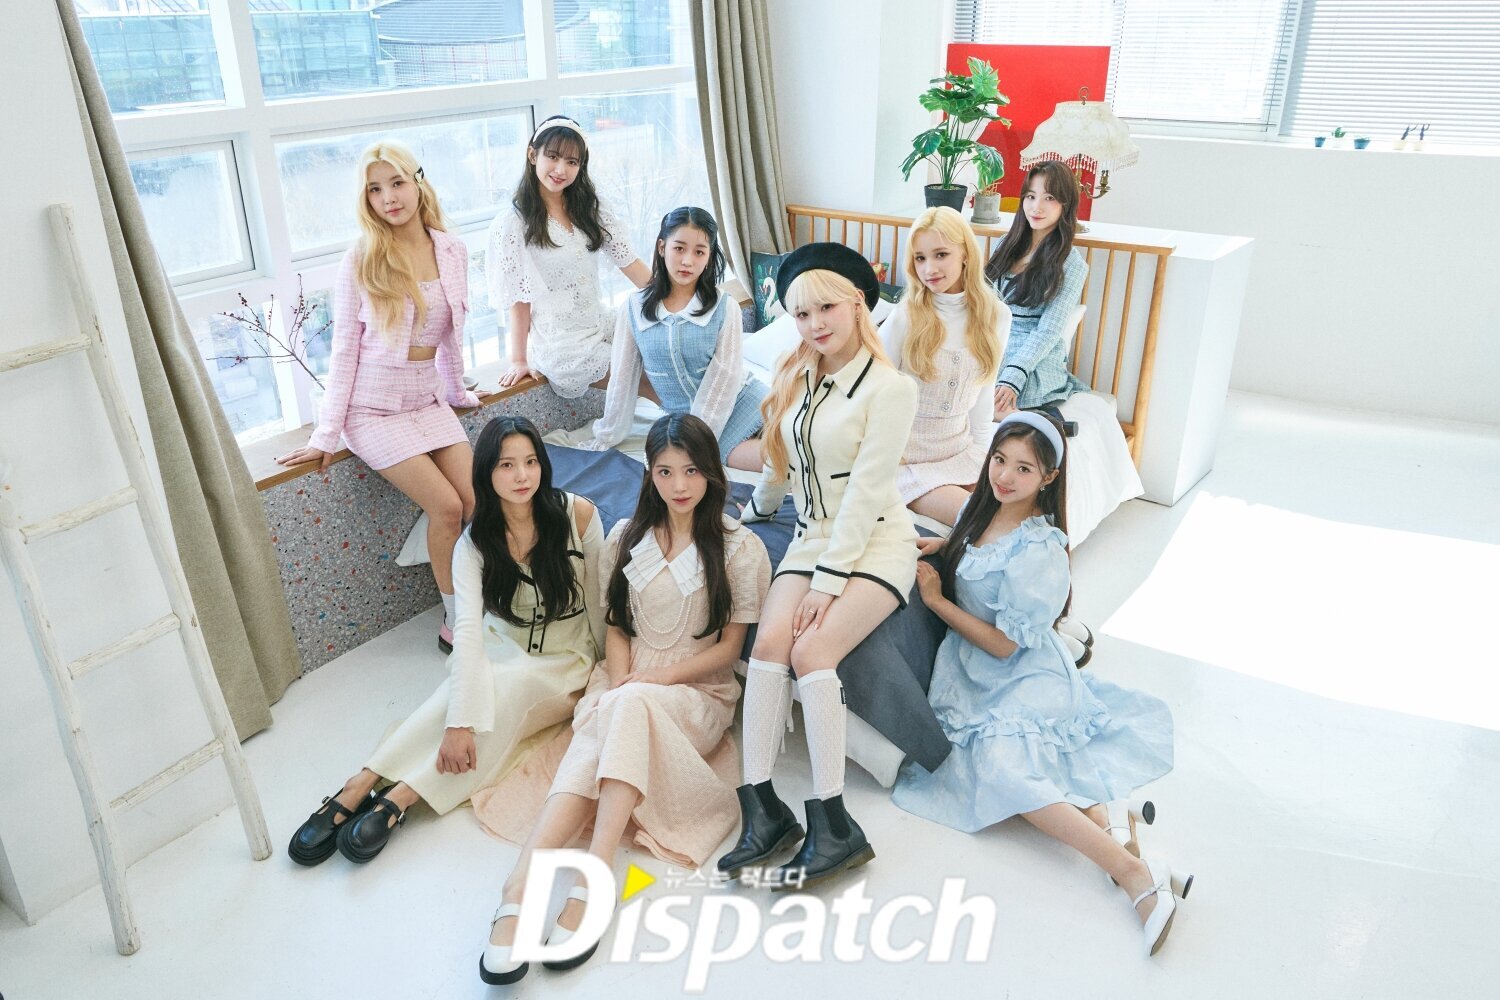 220226 Kep1er Hikaru - Debut Album 'FIRST IMPACT' Promotion Photoshoot by  Dispatch